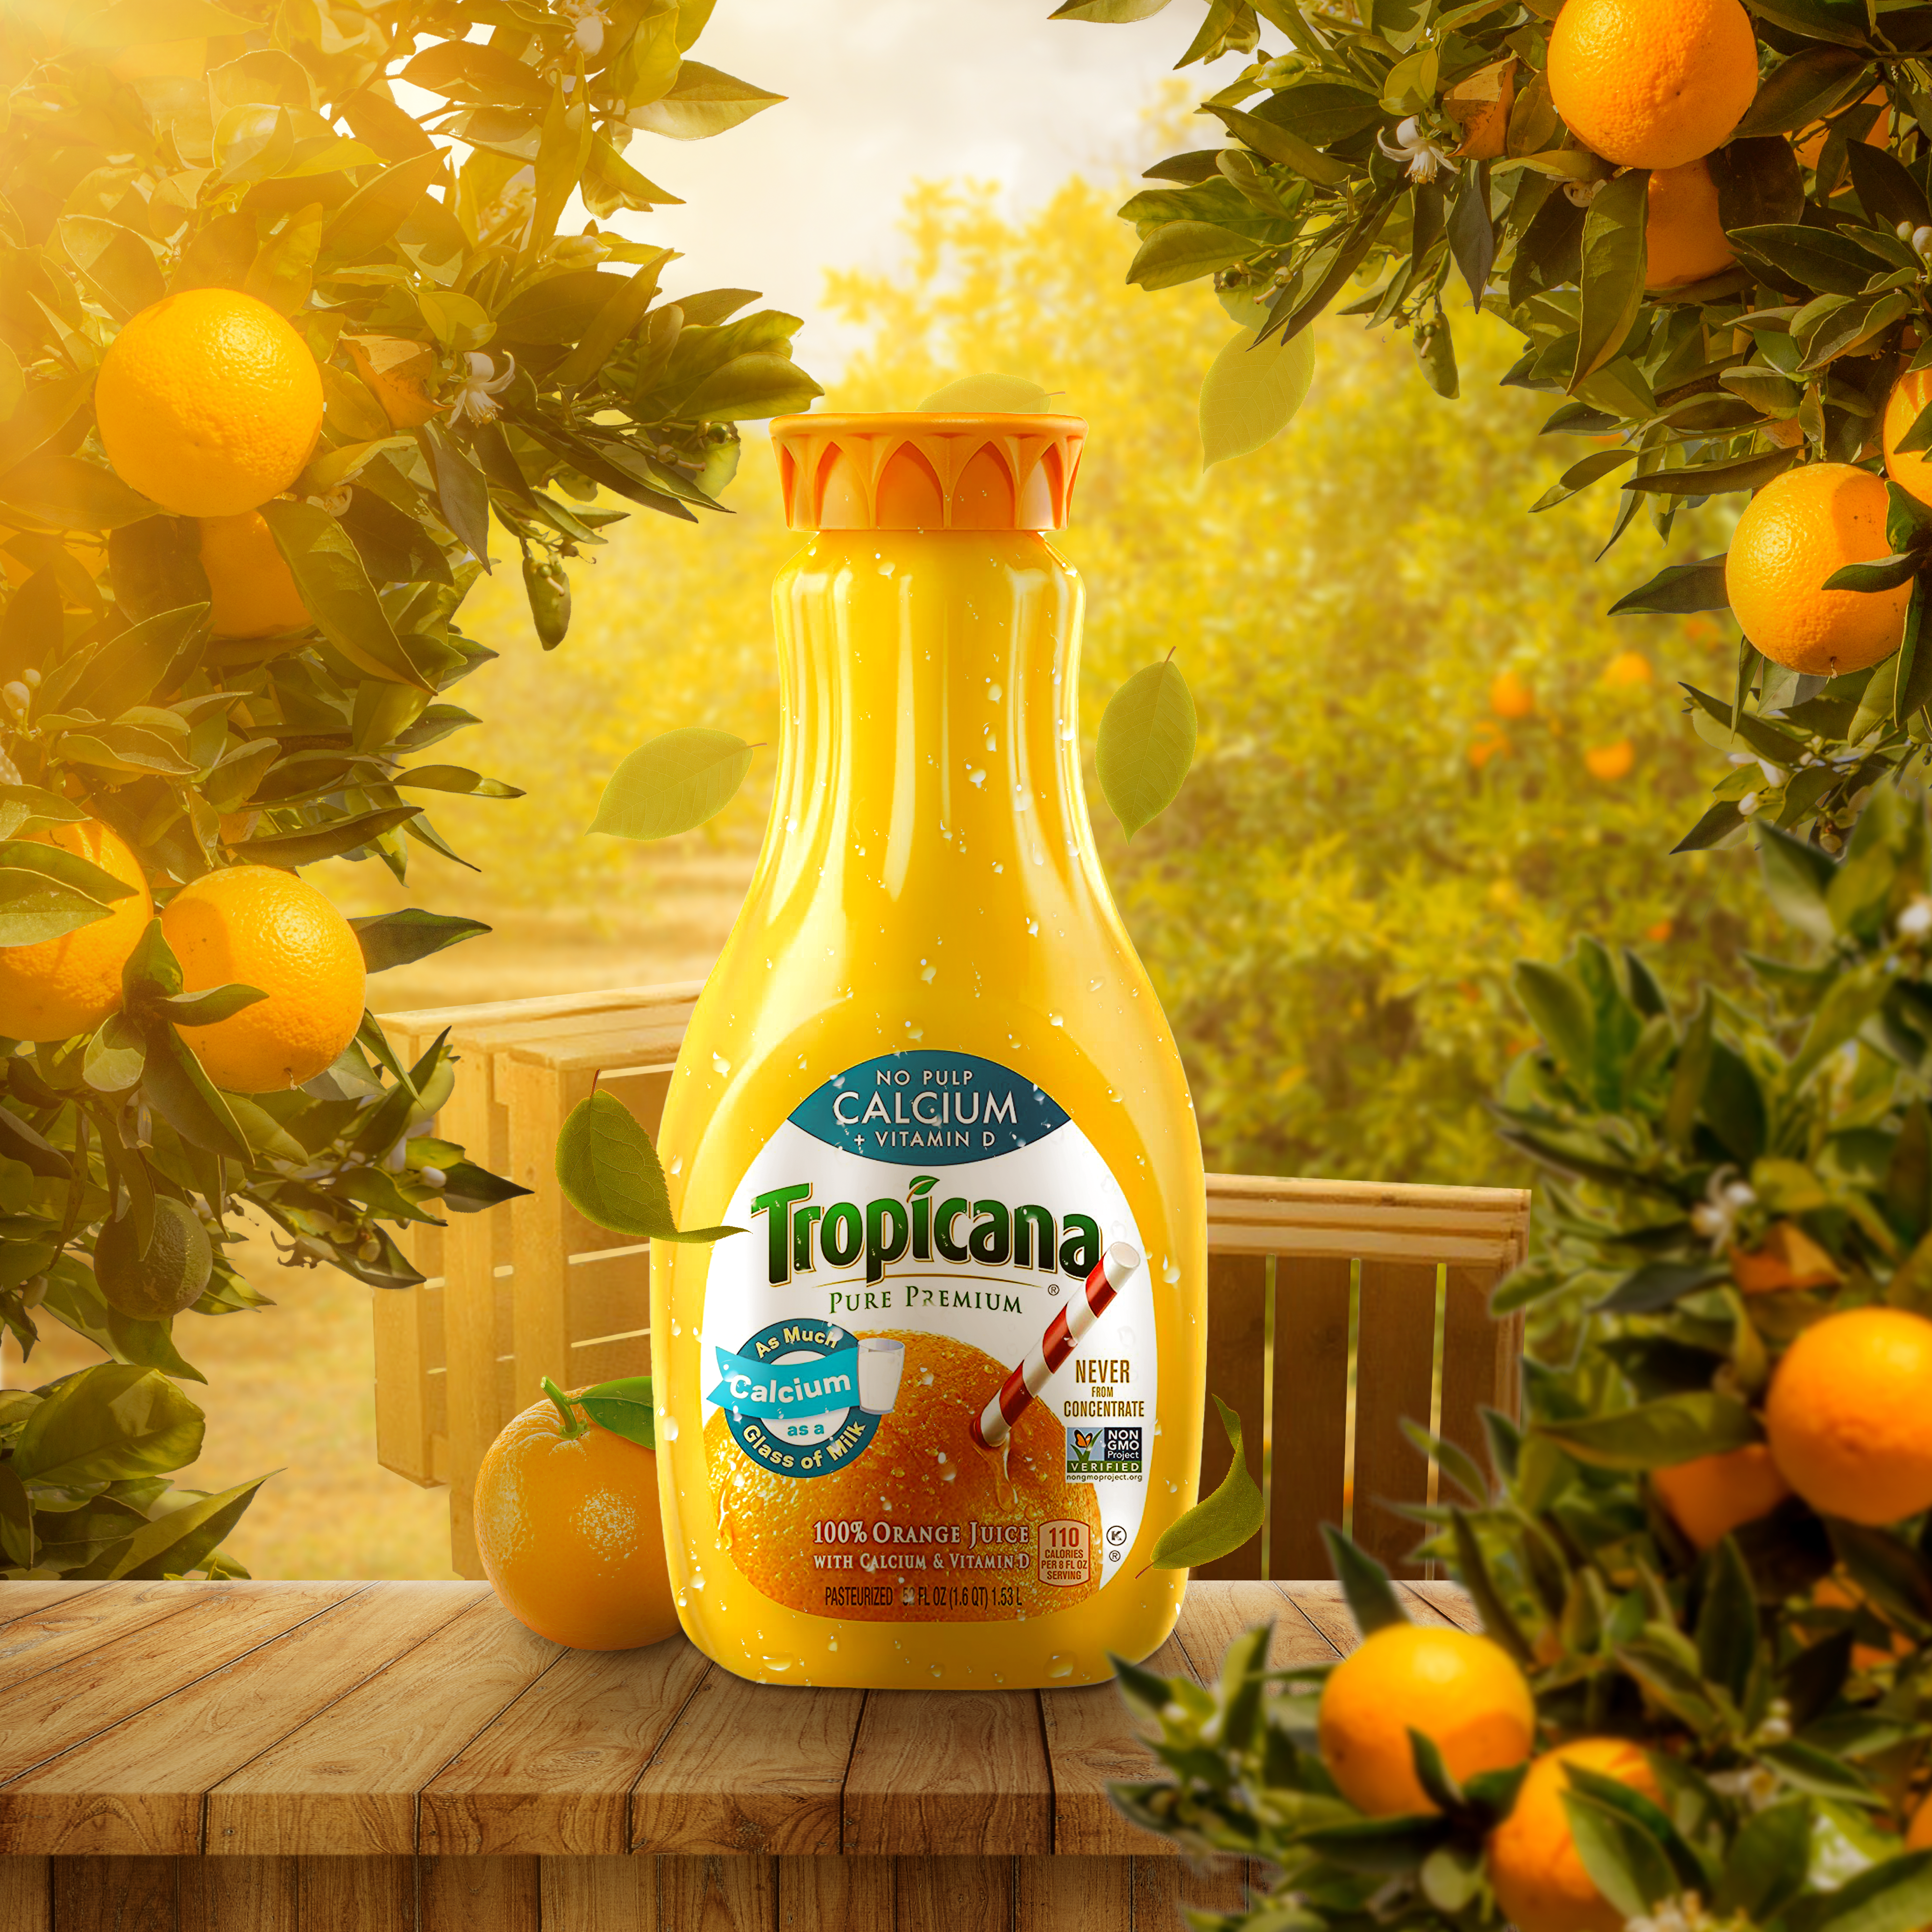 Fabricated promotional advertisement crafted for Tropicana. 2023